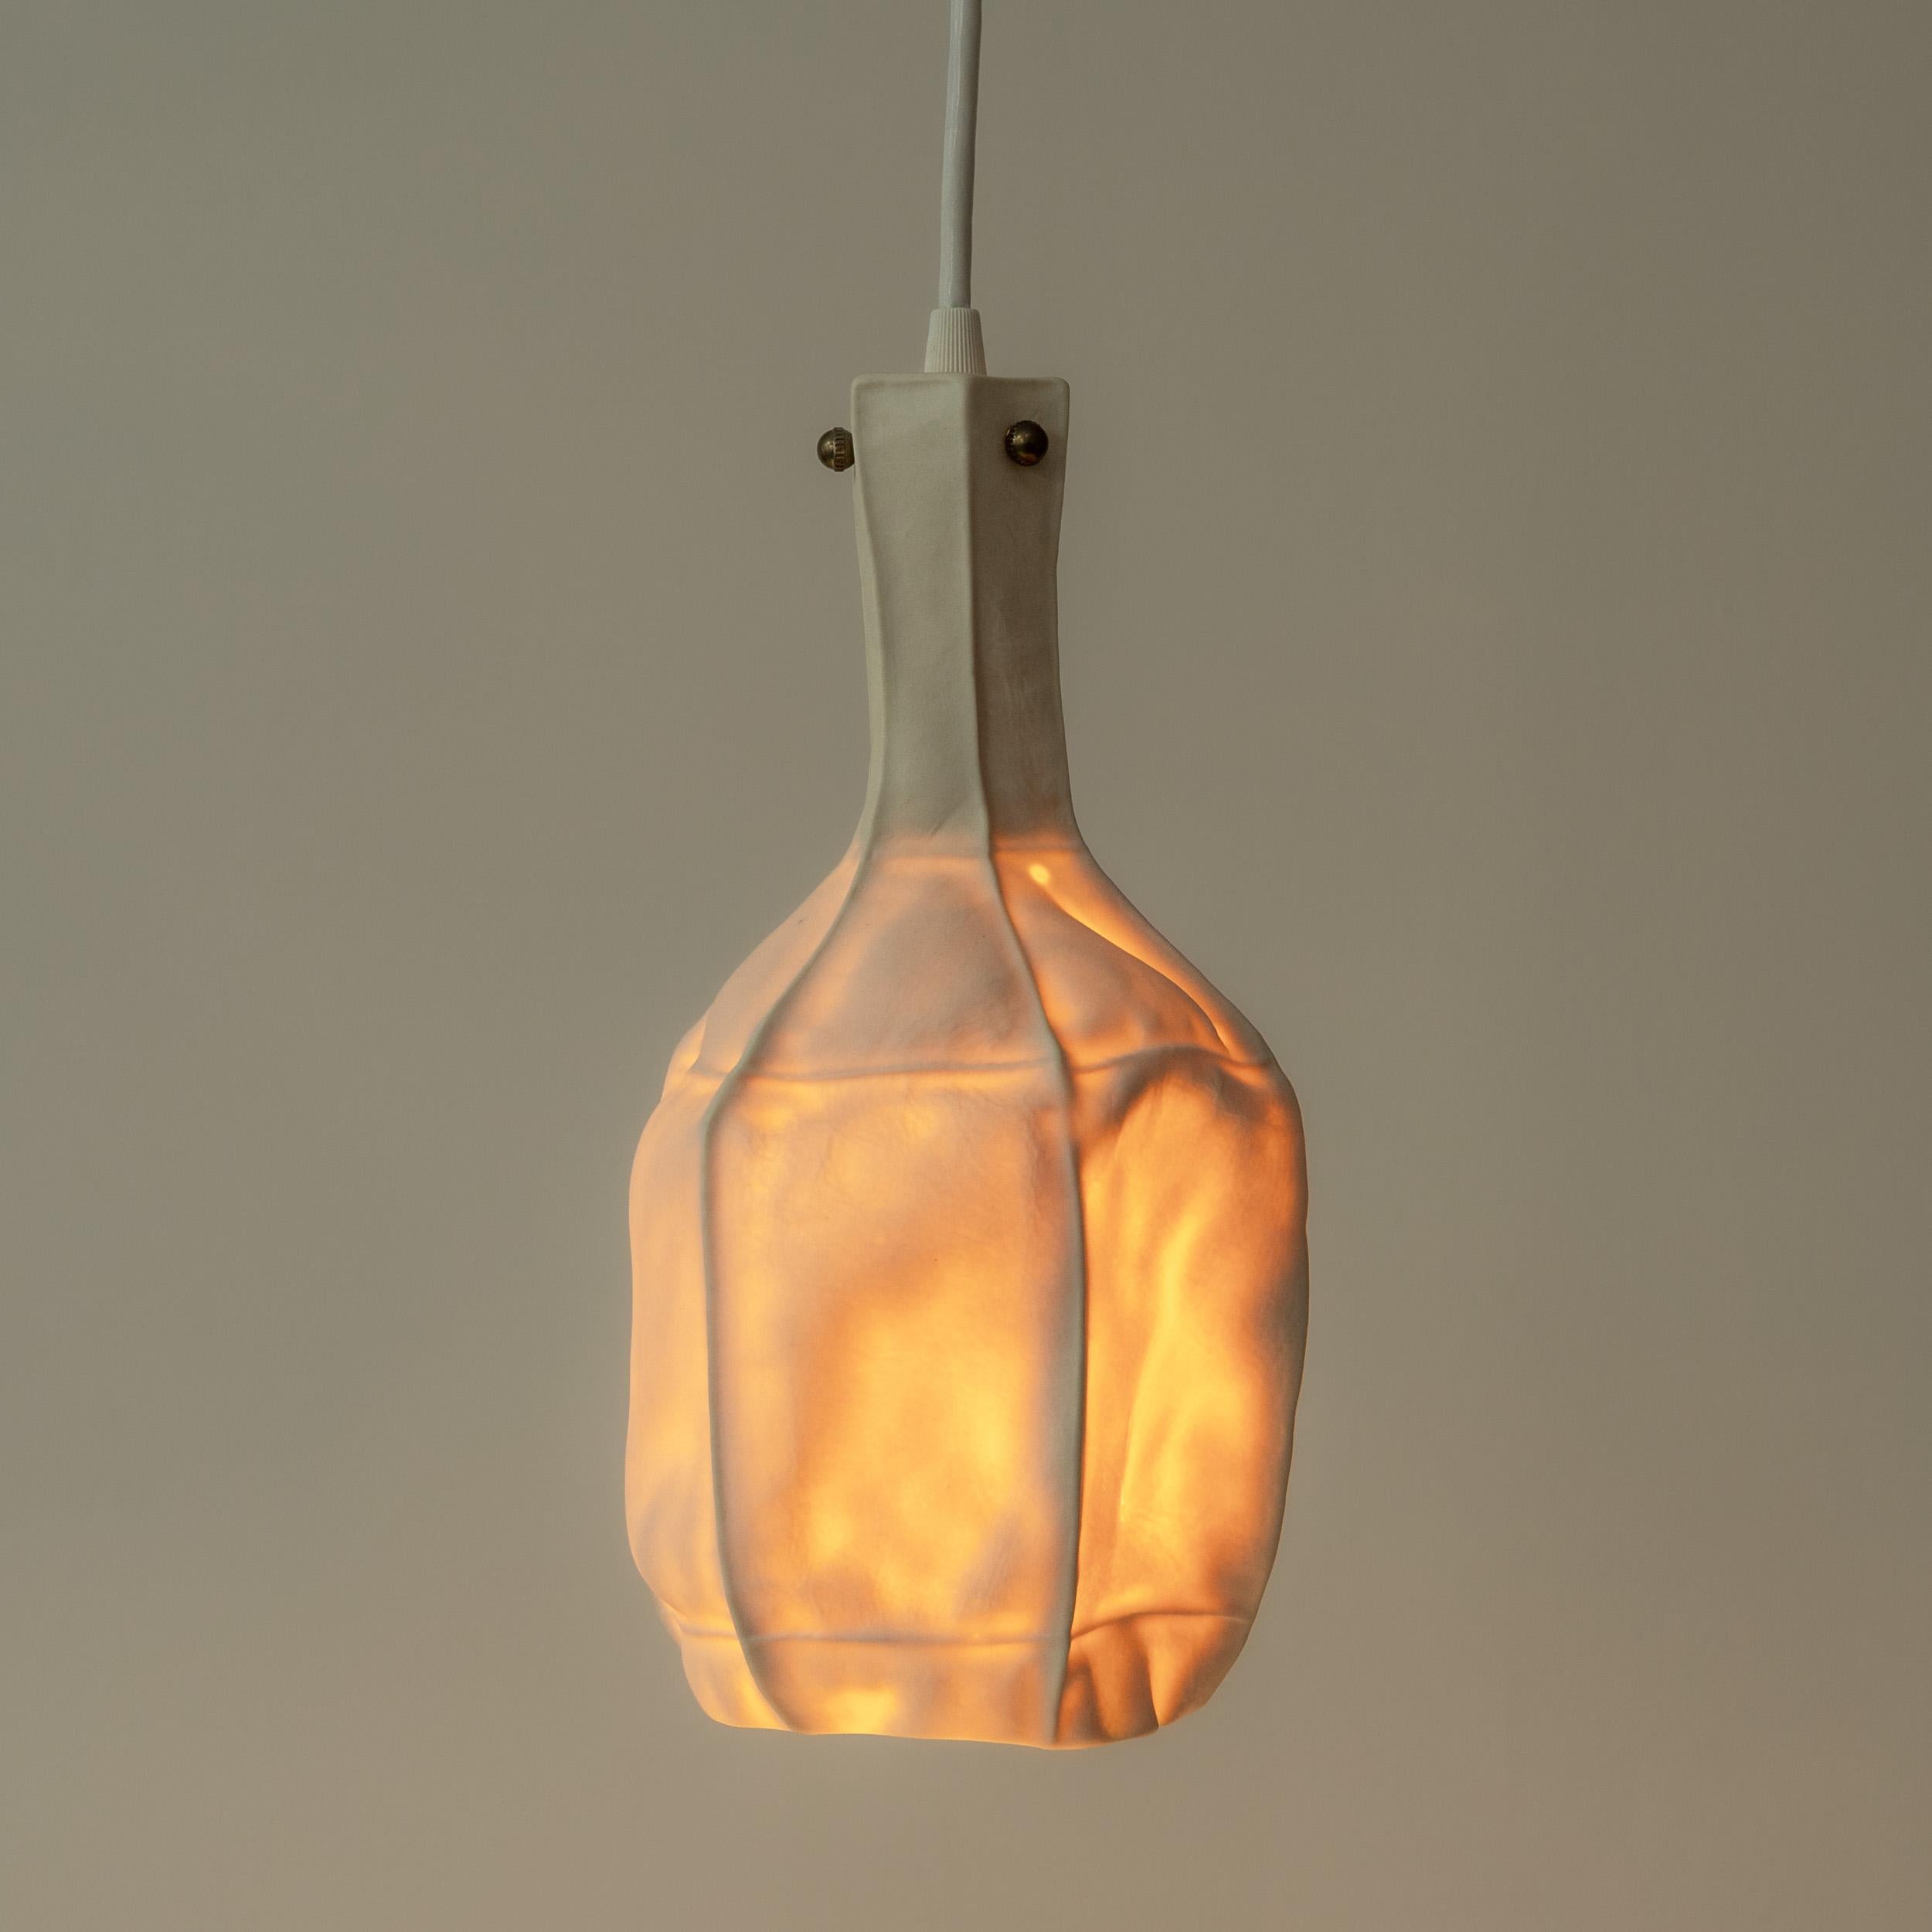 Kawa Series one-of-a-kind Pendant Light by Luft Tanaka Studio

Tactile and textured porcelain pendant light in an unique and organic form. Translucent porcelain diffuser casts a warm colored glow, perfect for a dining room or kitchen. Please inquire